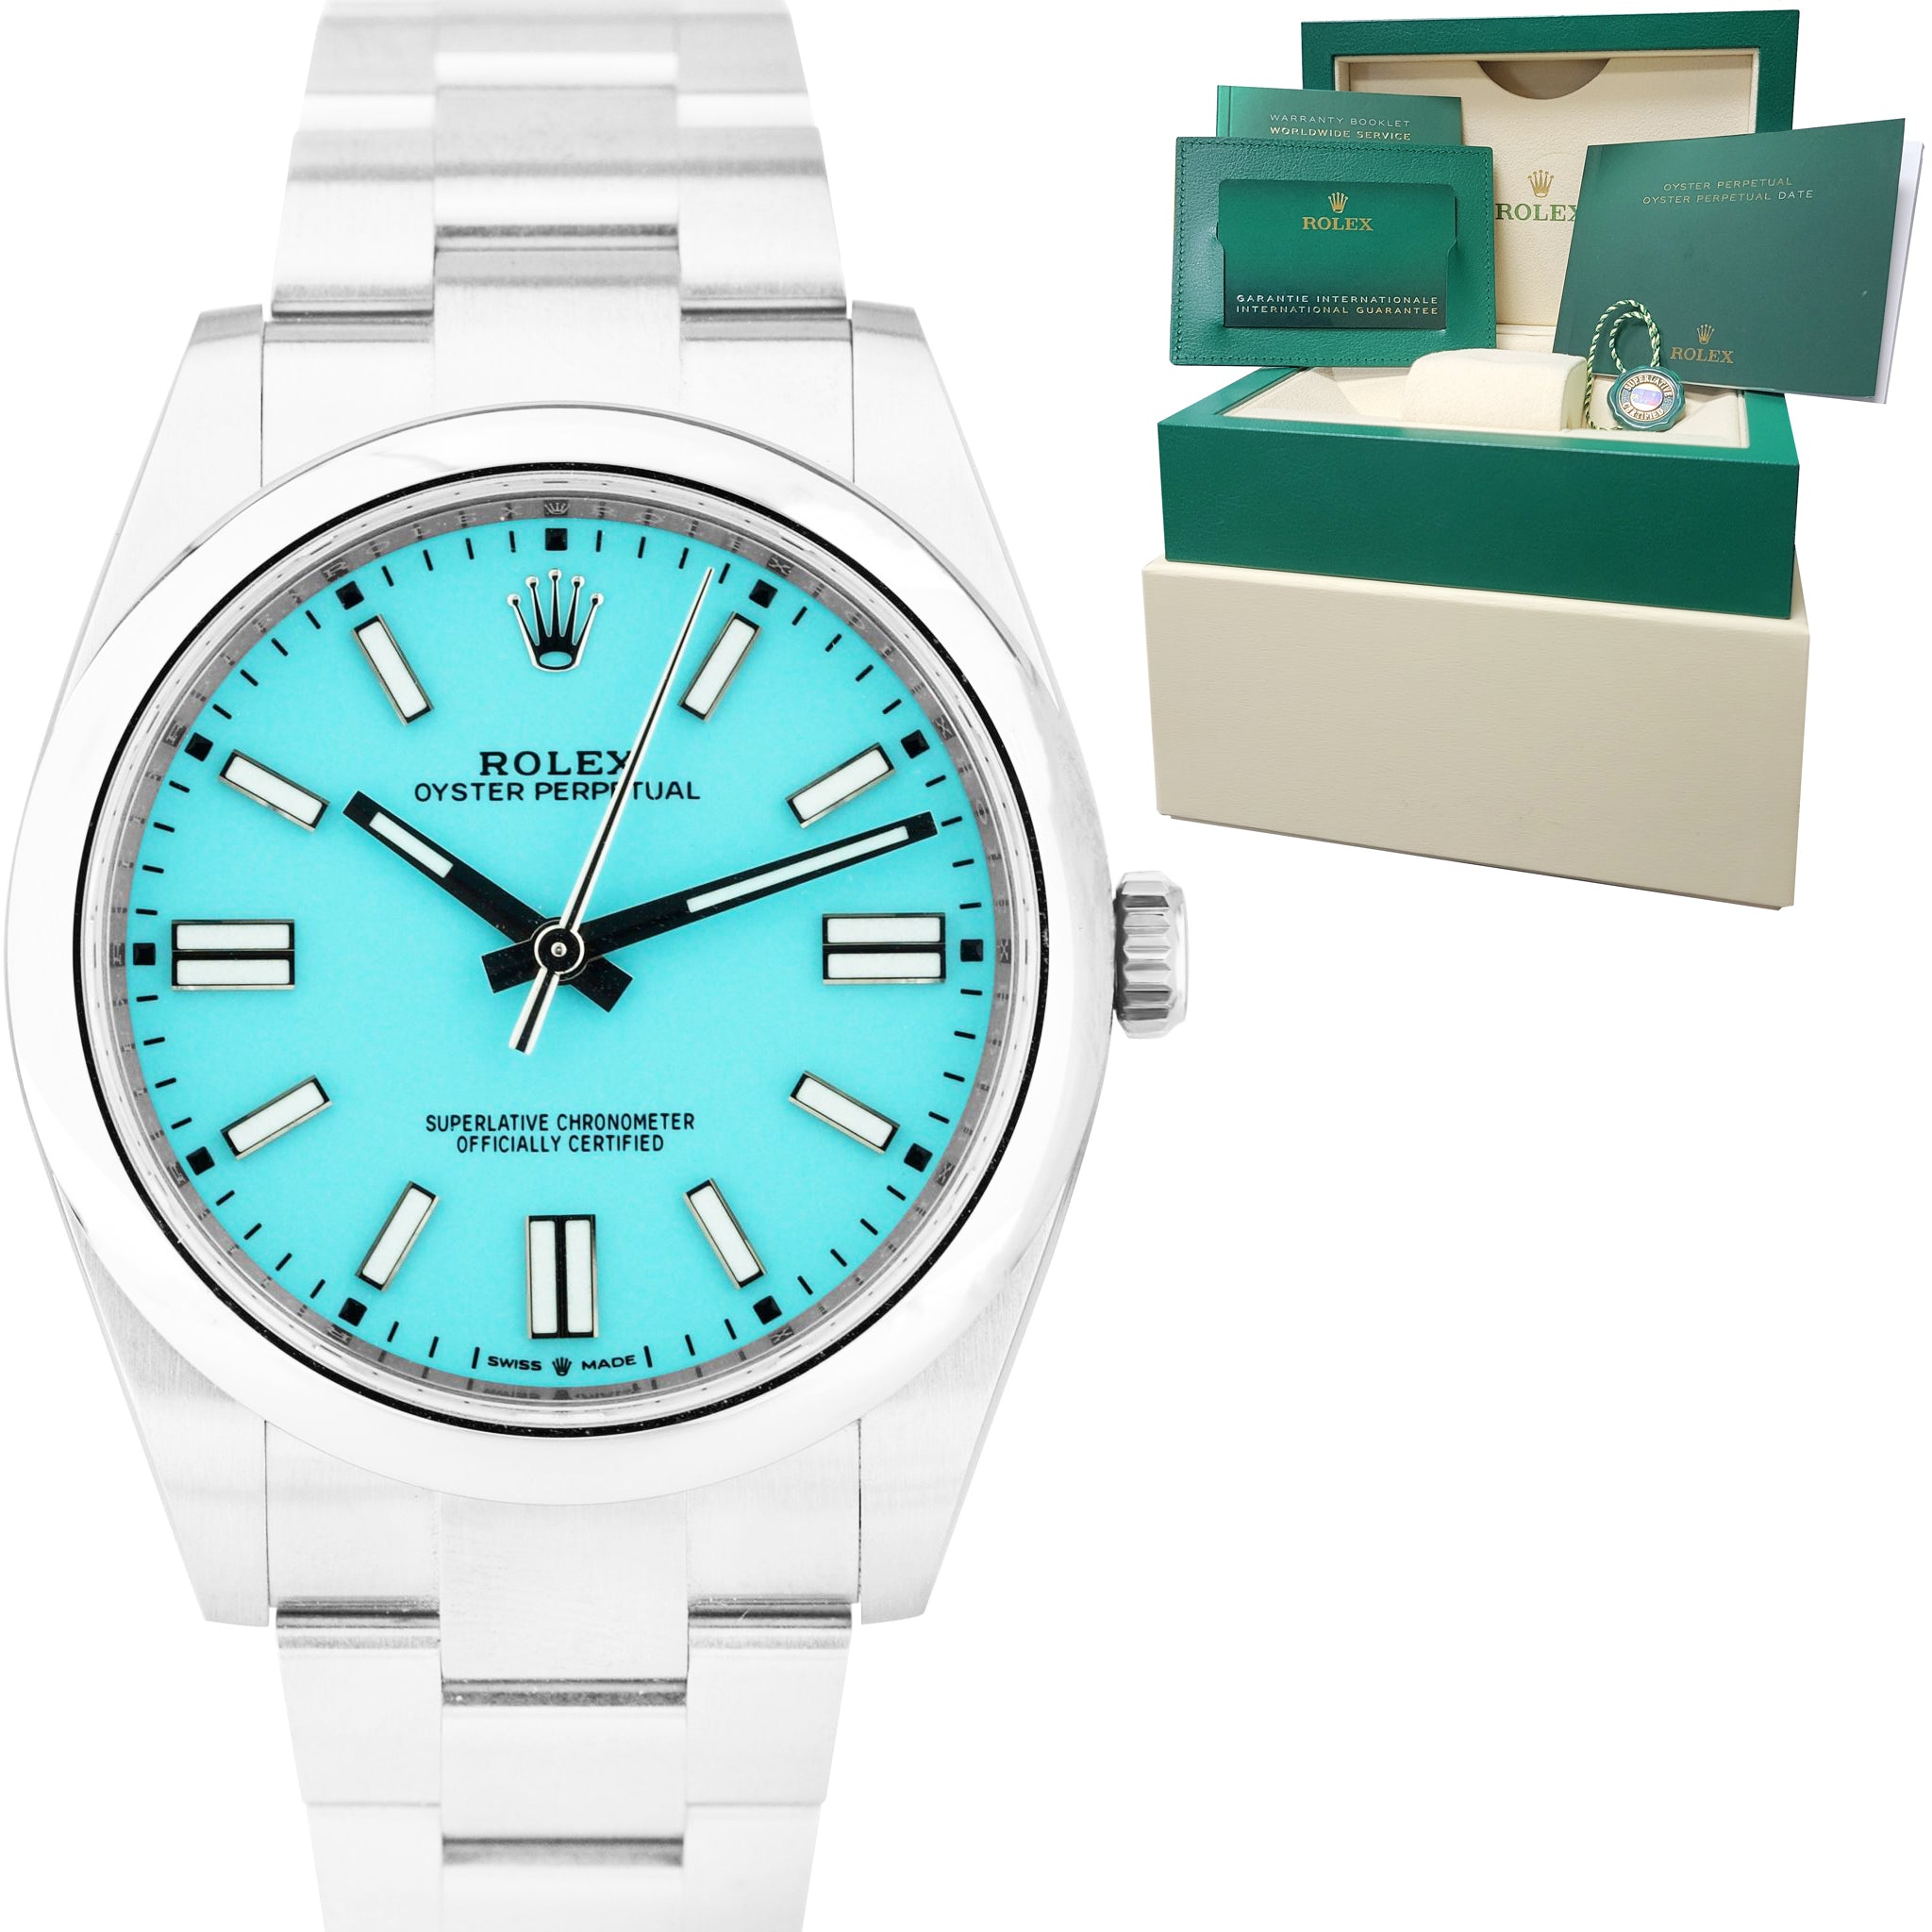 BRAND NEW SEPT. 2021 Rolex Oyster Perpetual 41mm TURQUOISE BLUE Watch 124300 B+P